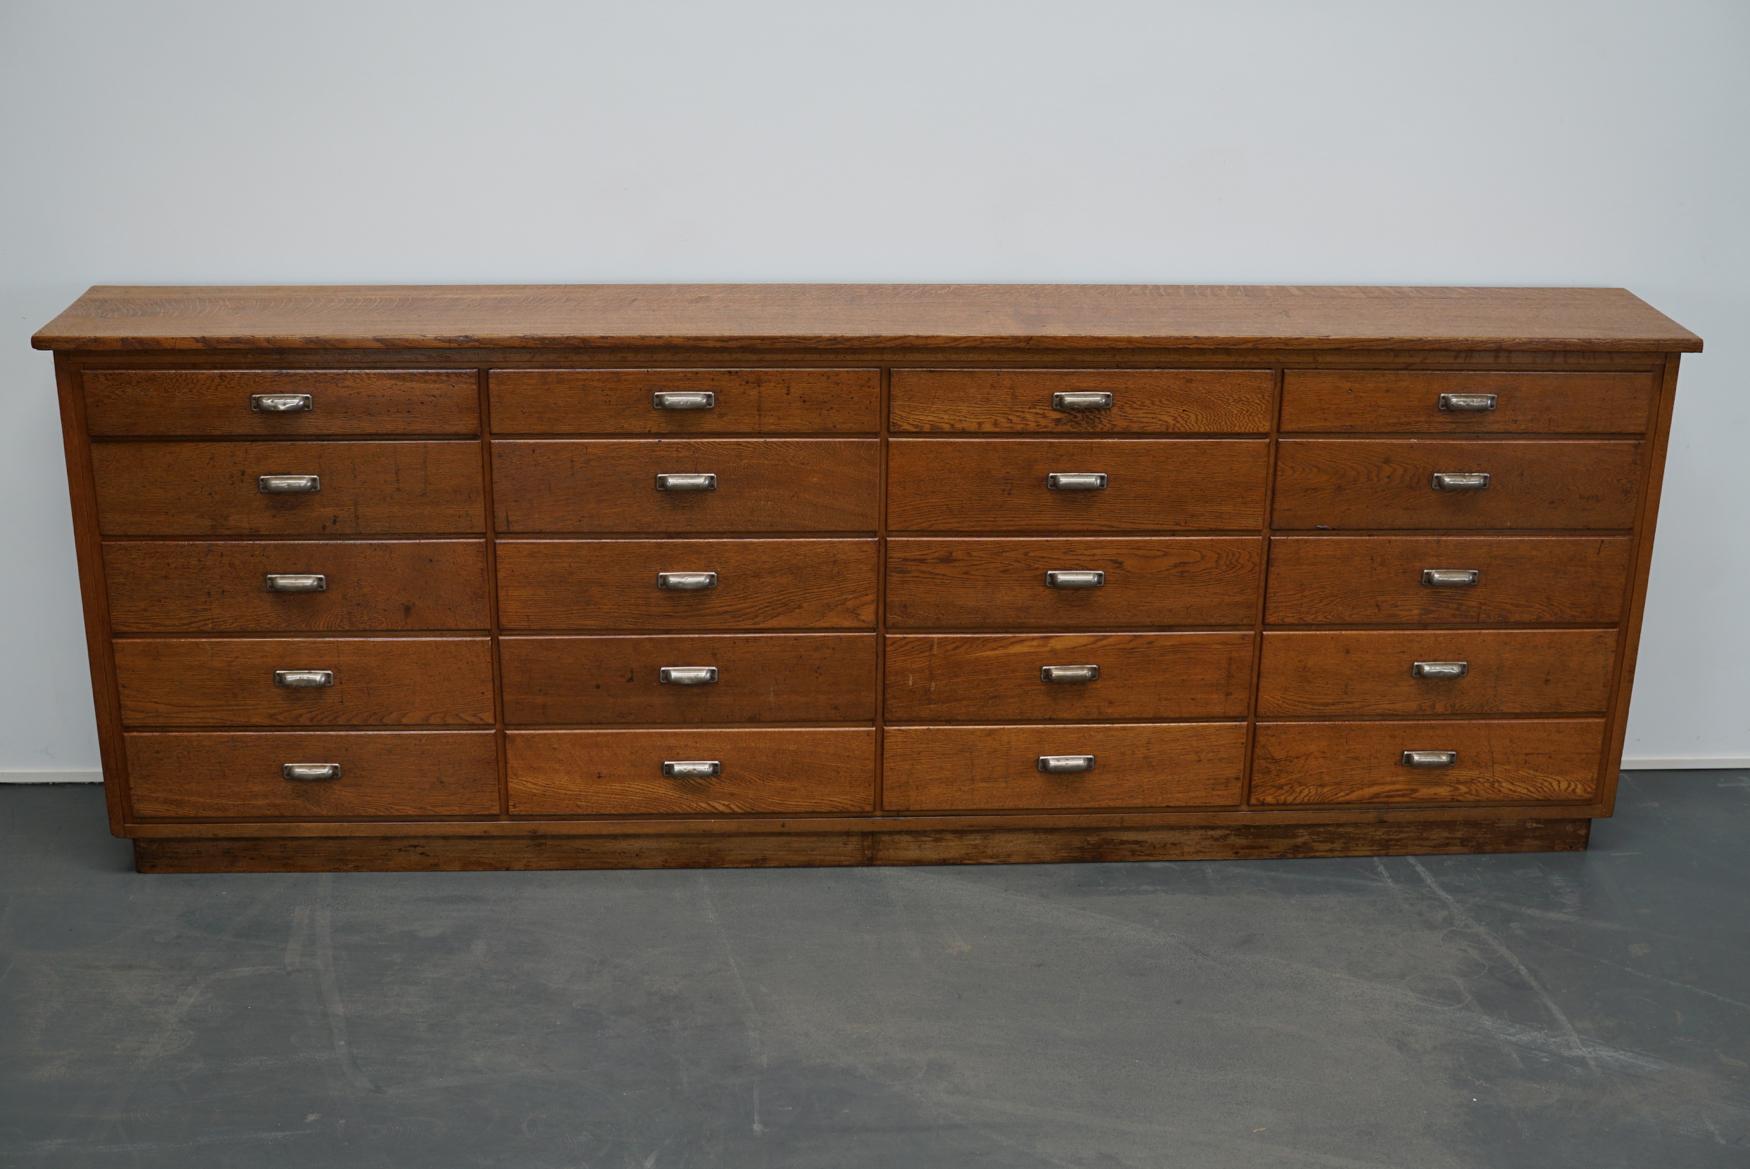 This apothecary / filing cabinet was produced during the 1930s in The Netherlands. This piece features 20 drawers. The interior dimensions of the drawers are: DWH 25 x 55 x 13 cm and the top four 25 x 55 x 8 cm.